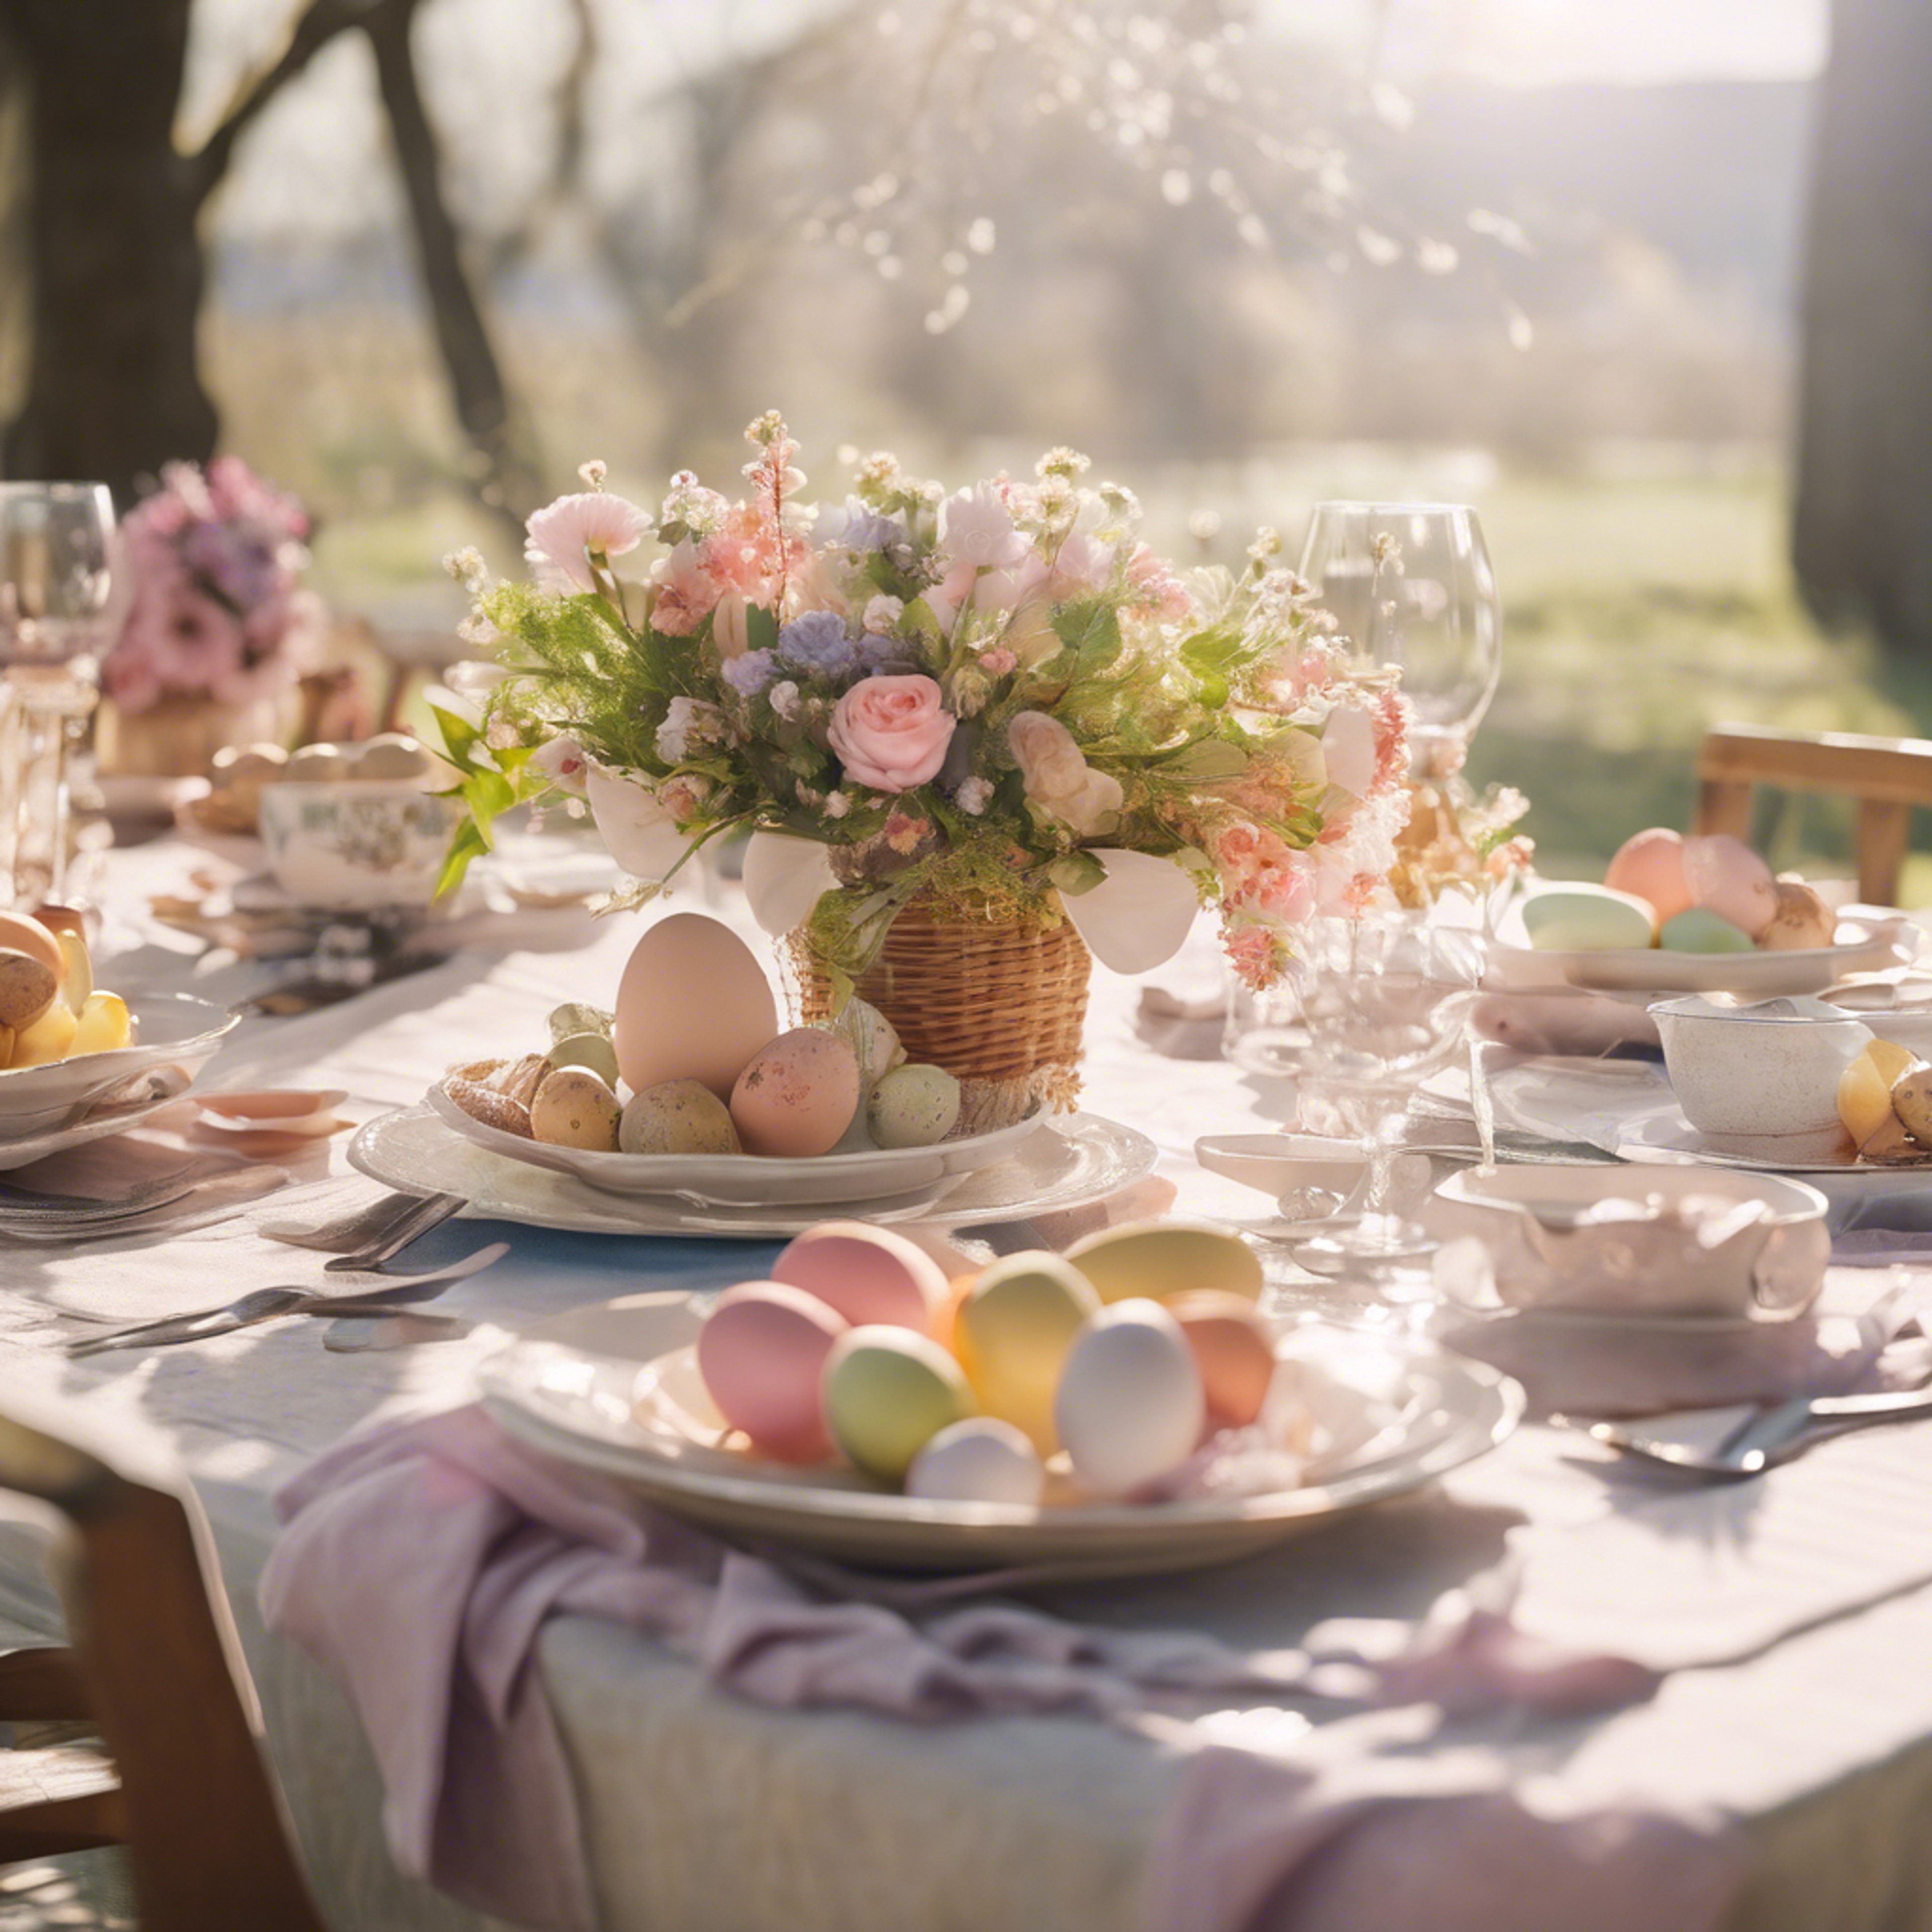 Easter lunch table, set in pastels, with a floral centerpiece under a warm spring sunlight.壁紙[3b37a4e806834220b5ea]